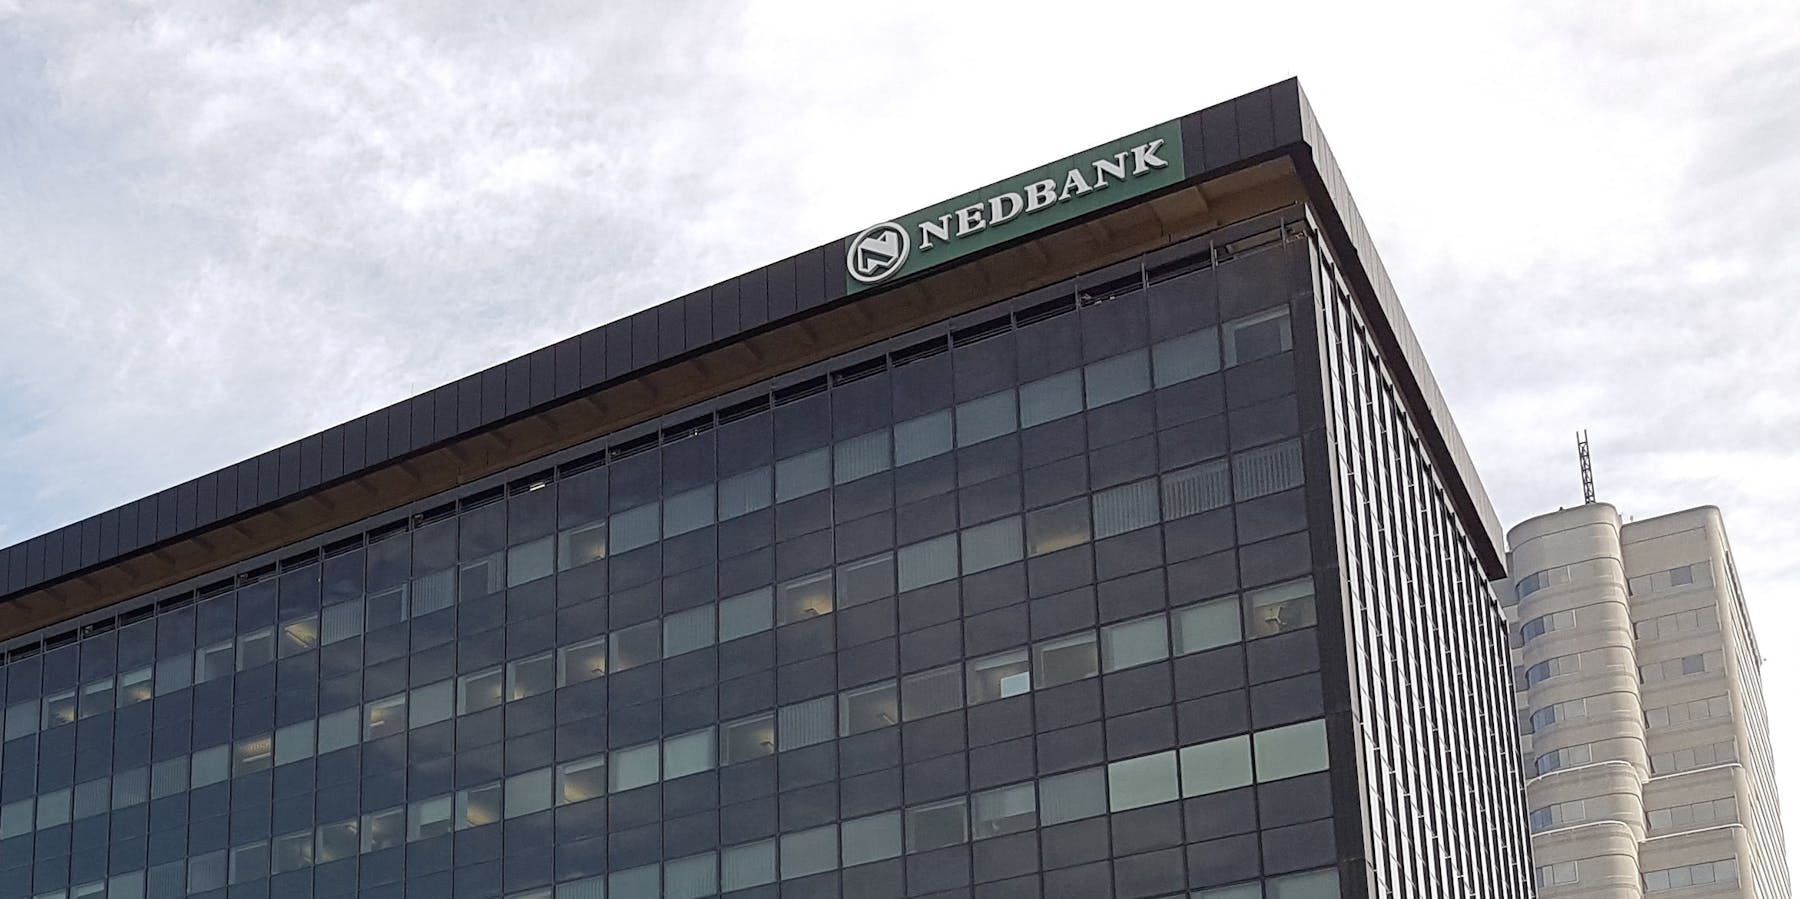 Nedbank regional office in Cape Town, South Africa